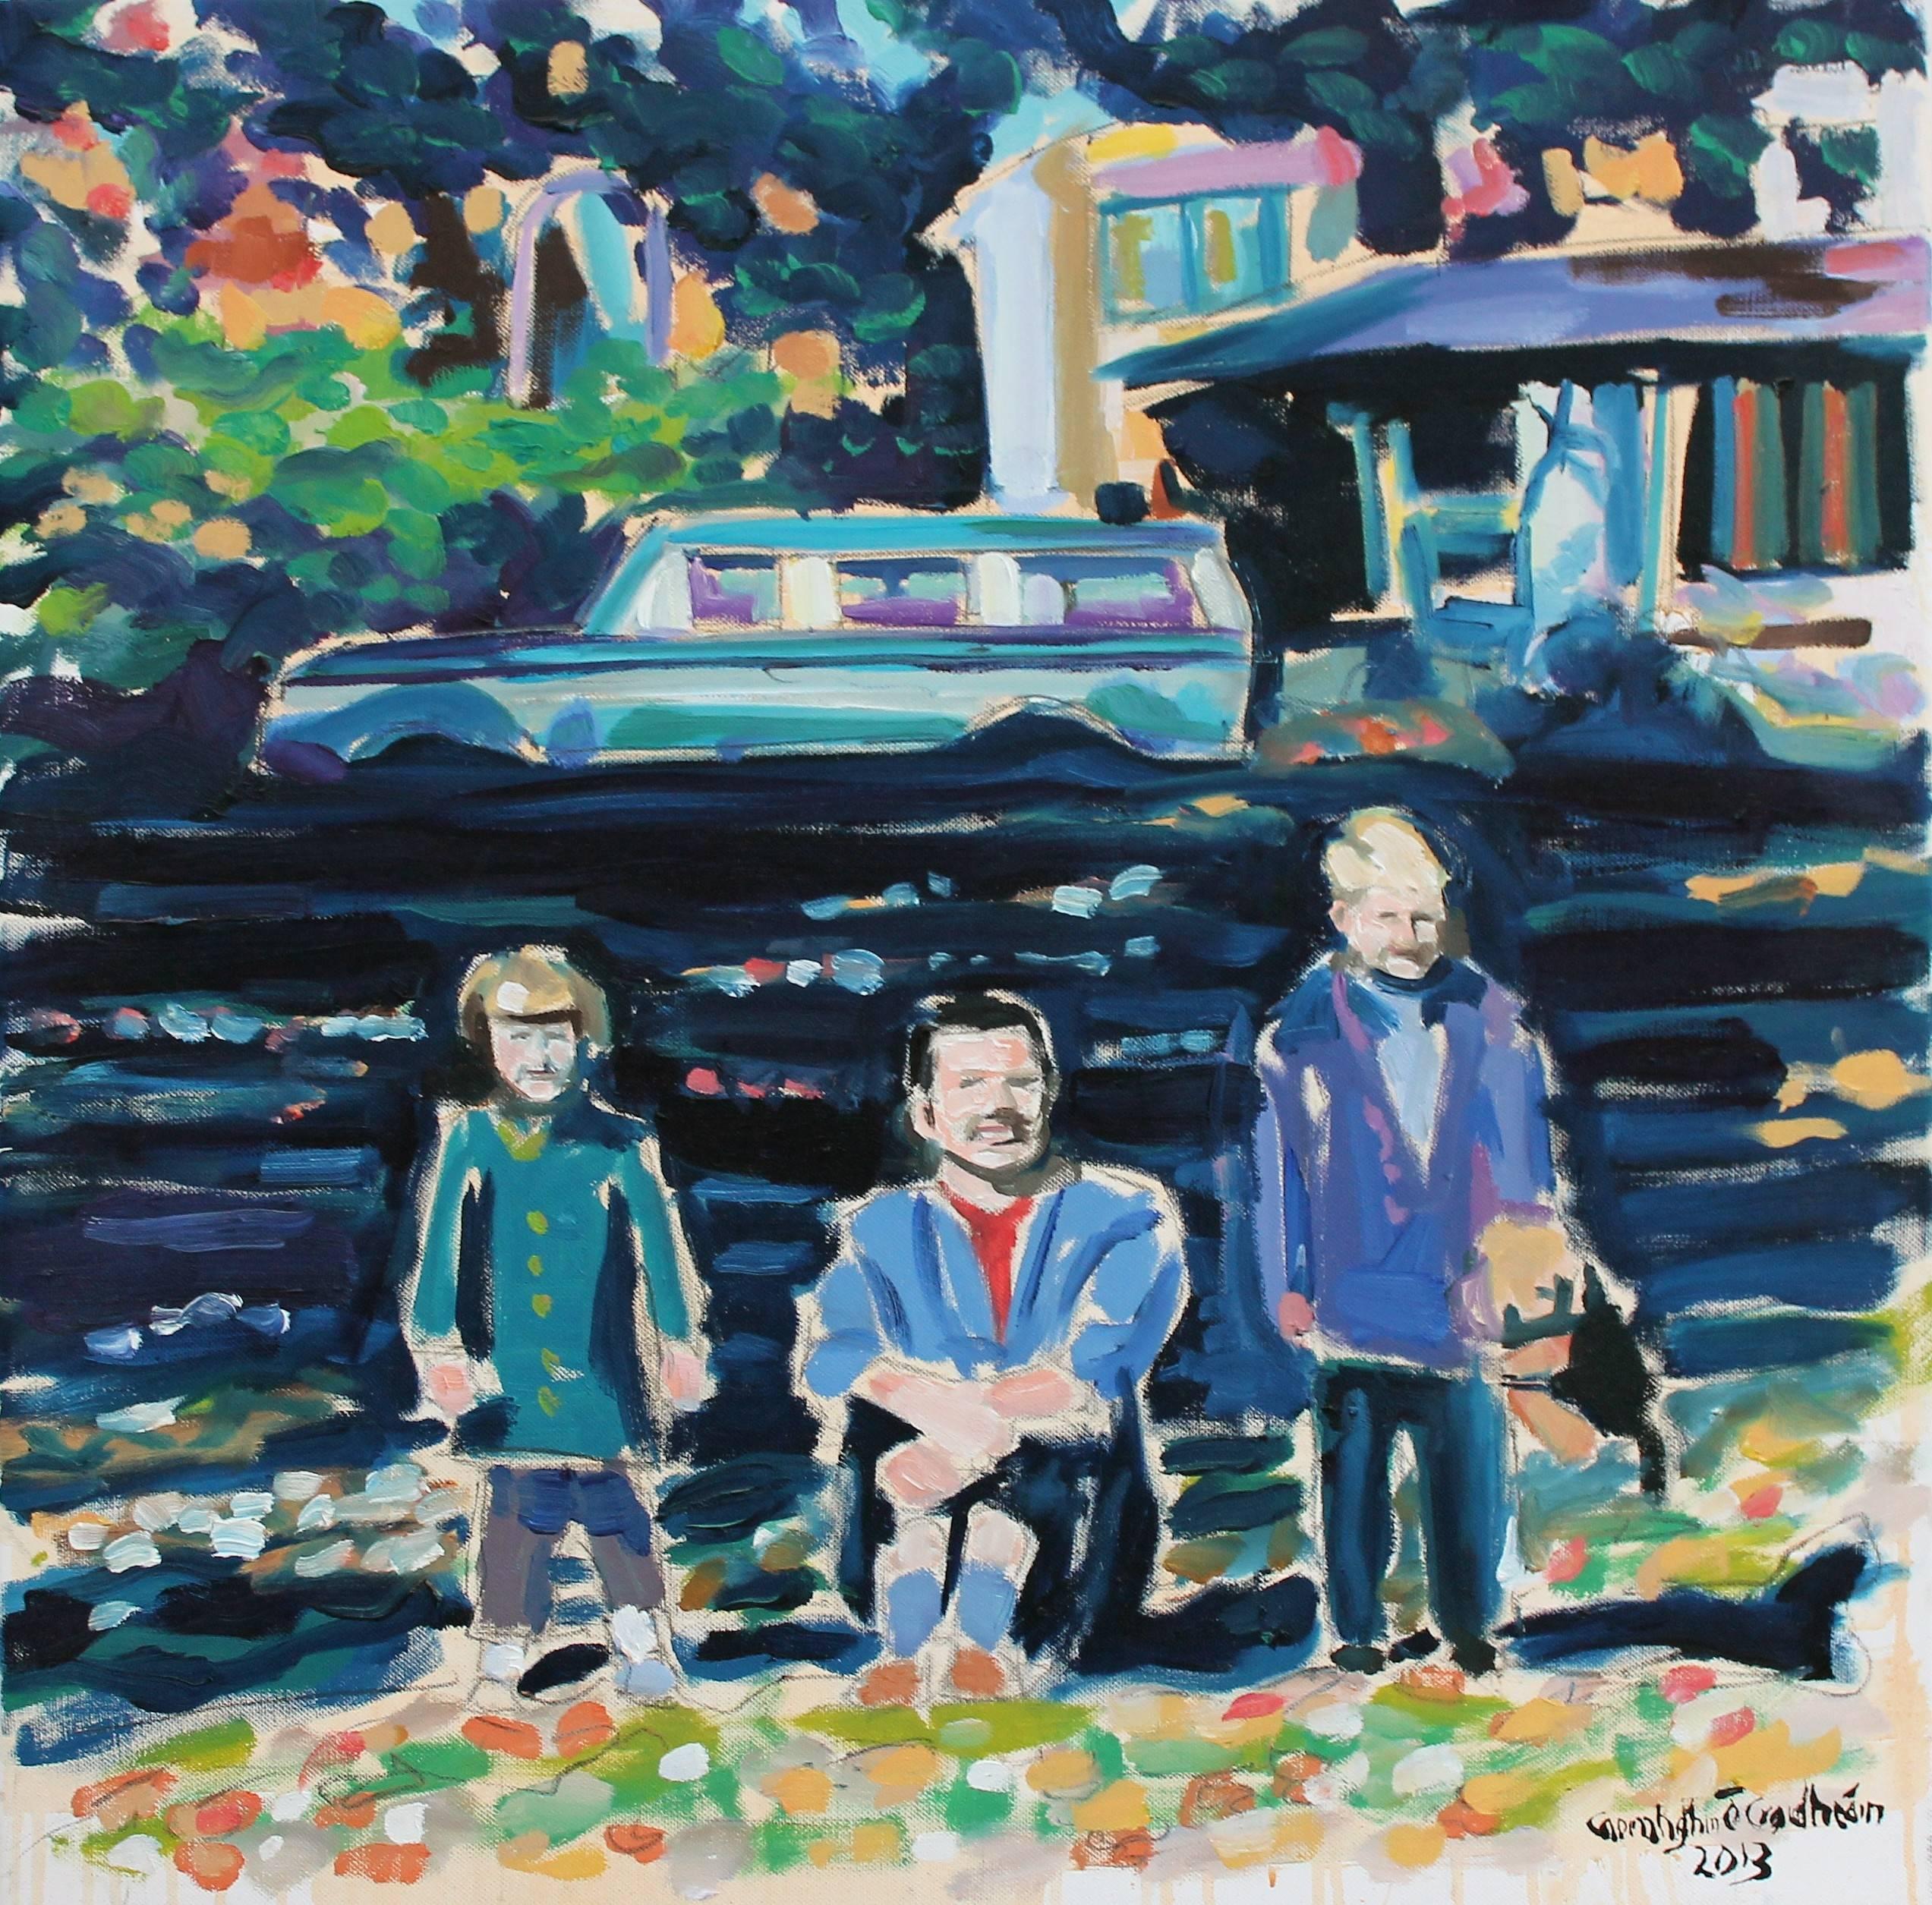 Caoimhghin Ó Croidheáin Portrait Painting - In a Boston park with my father and sister 1960s, Oil Painting on Canvas